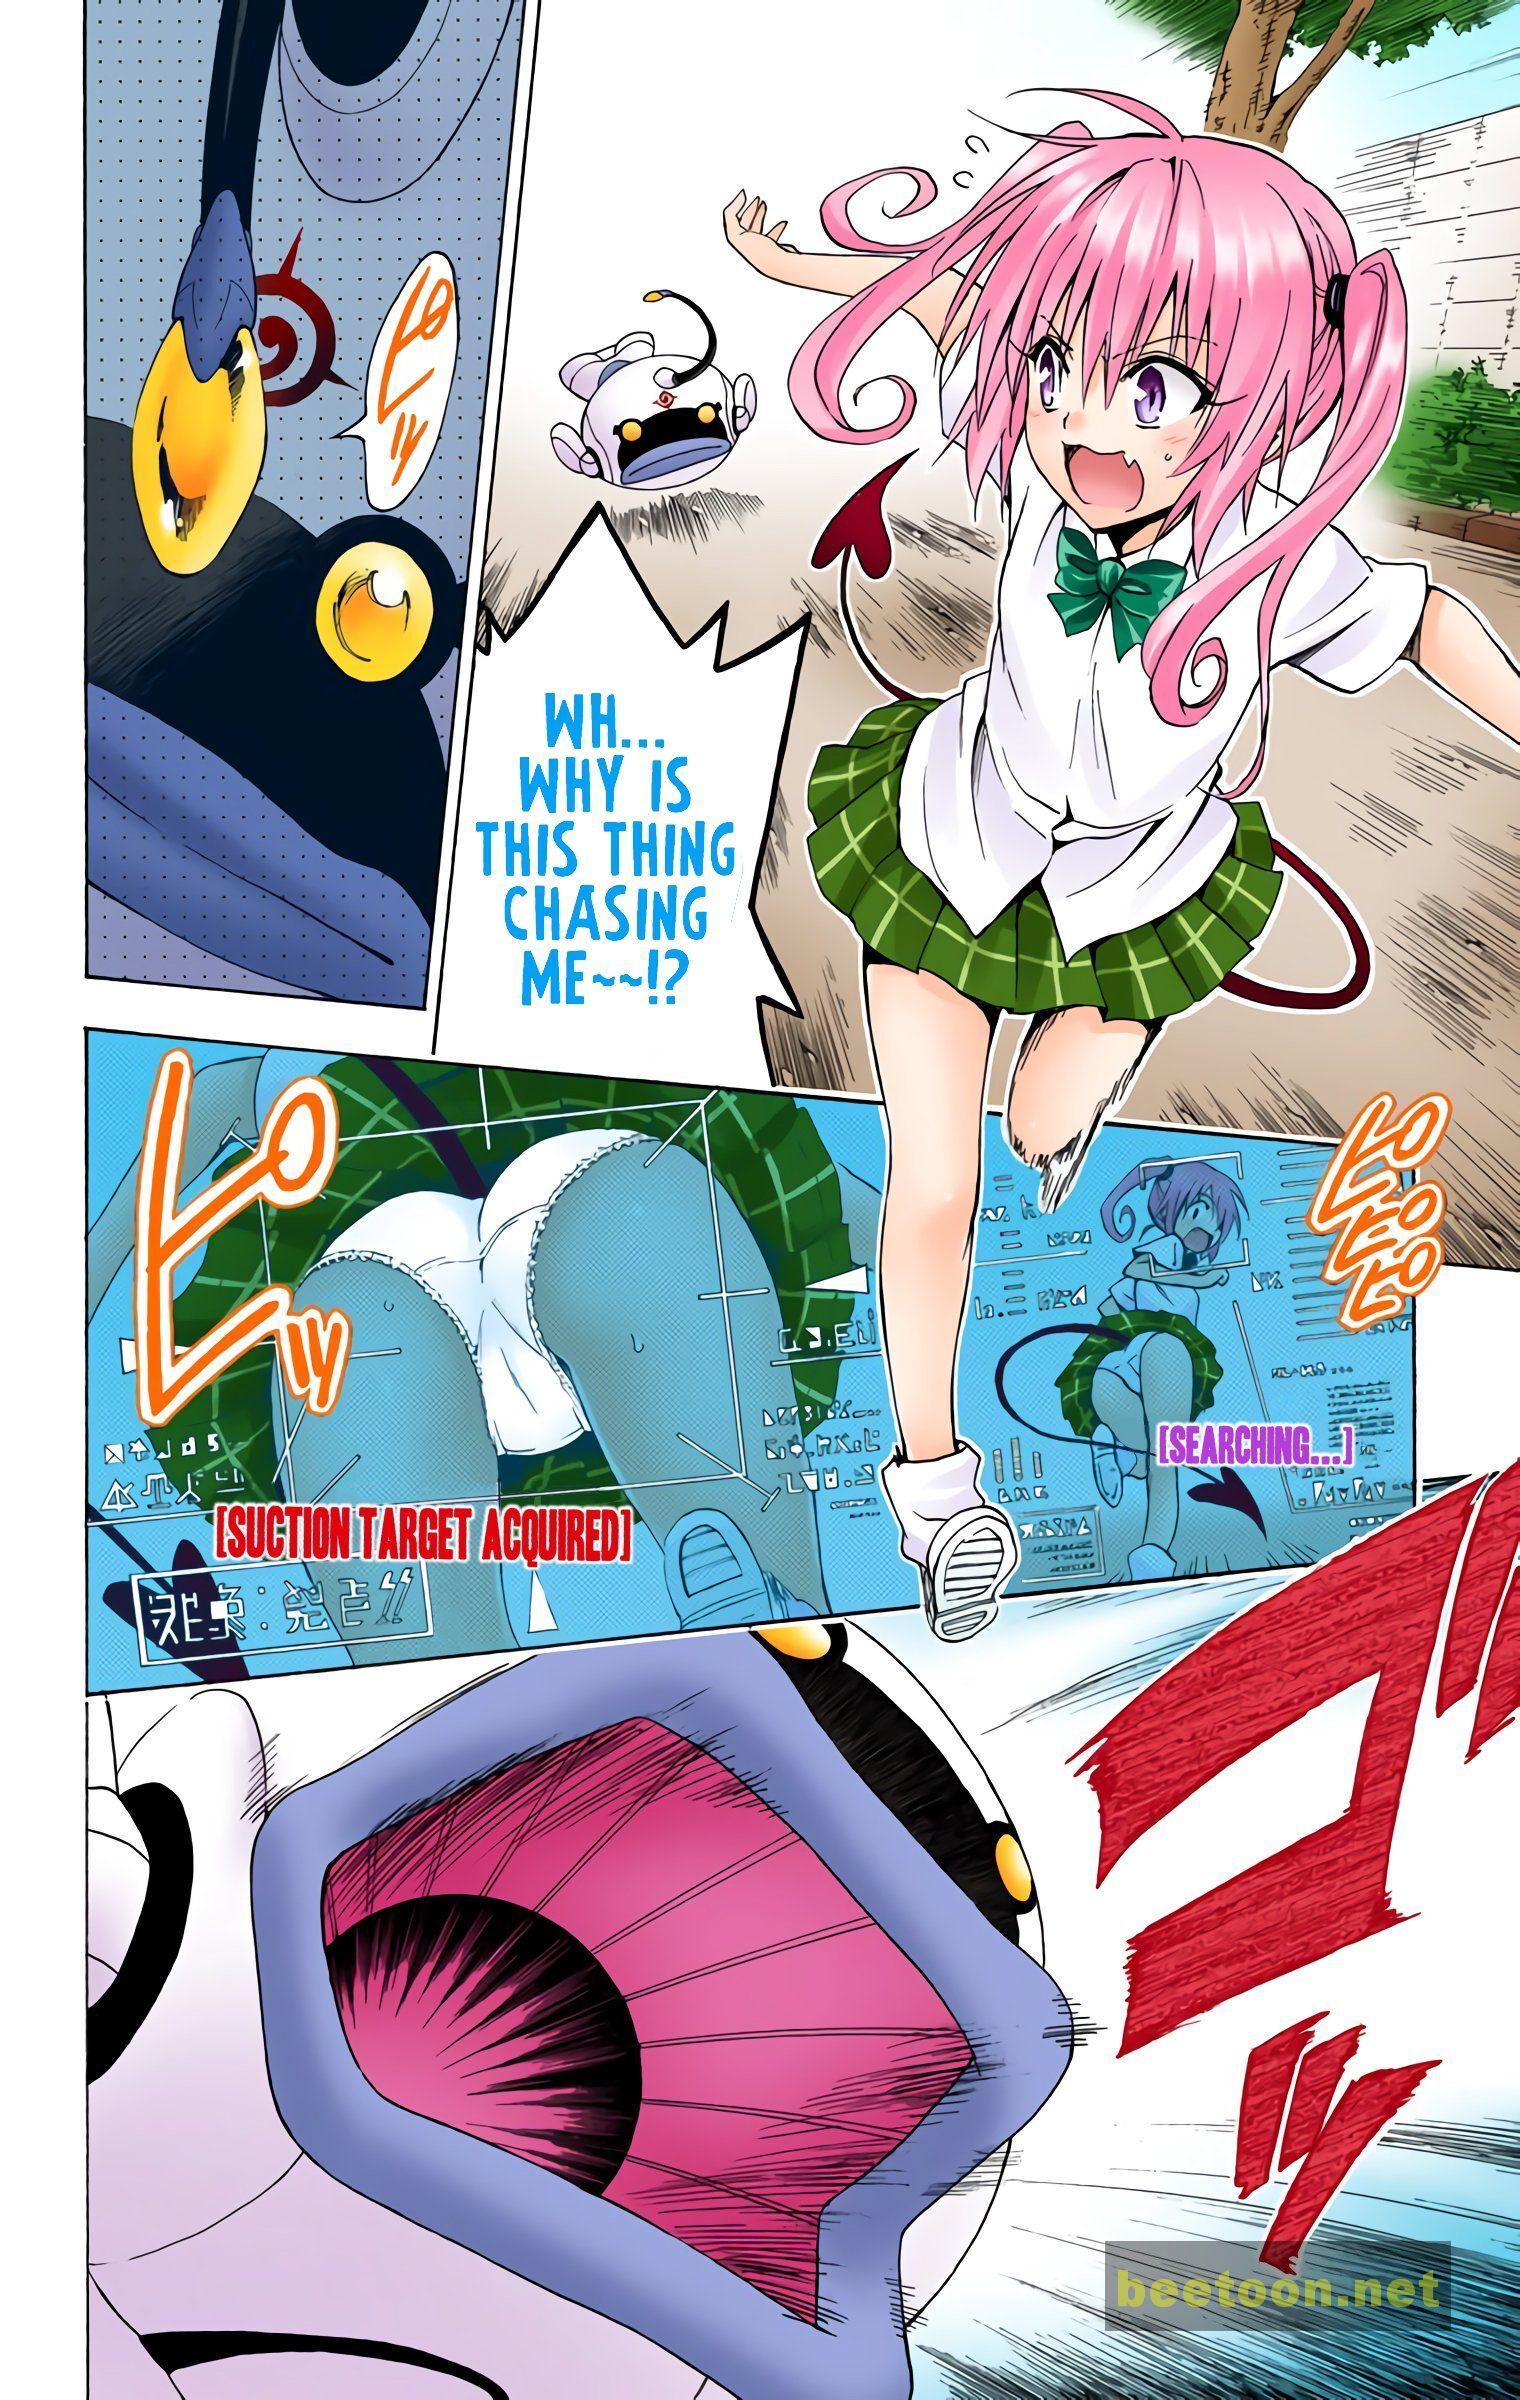 To LOVE-Ru Darkness - Full color Chapter 36-36.1-36.2-36.5-36.7 - ManhwaFull.net